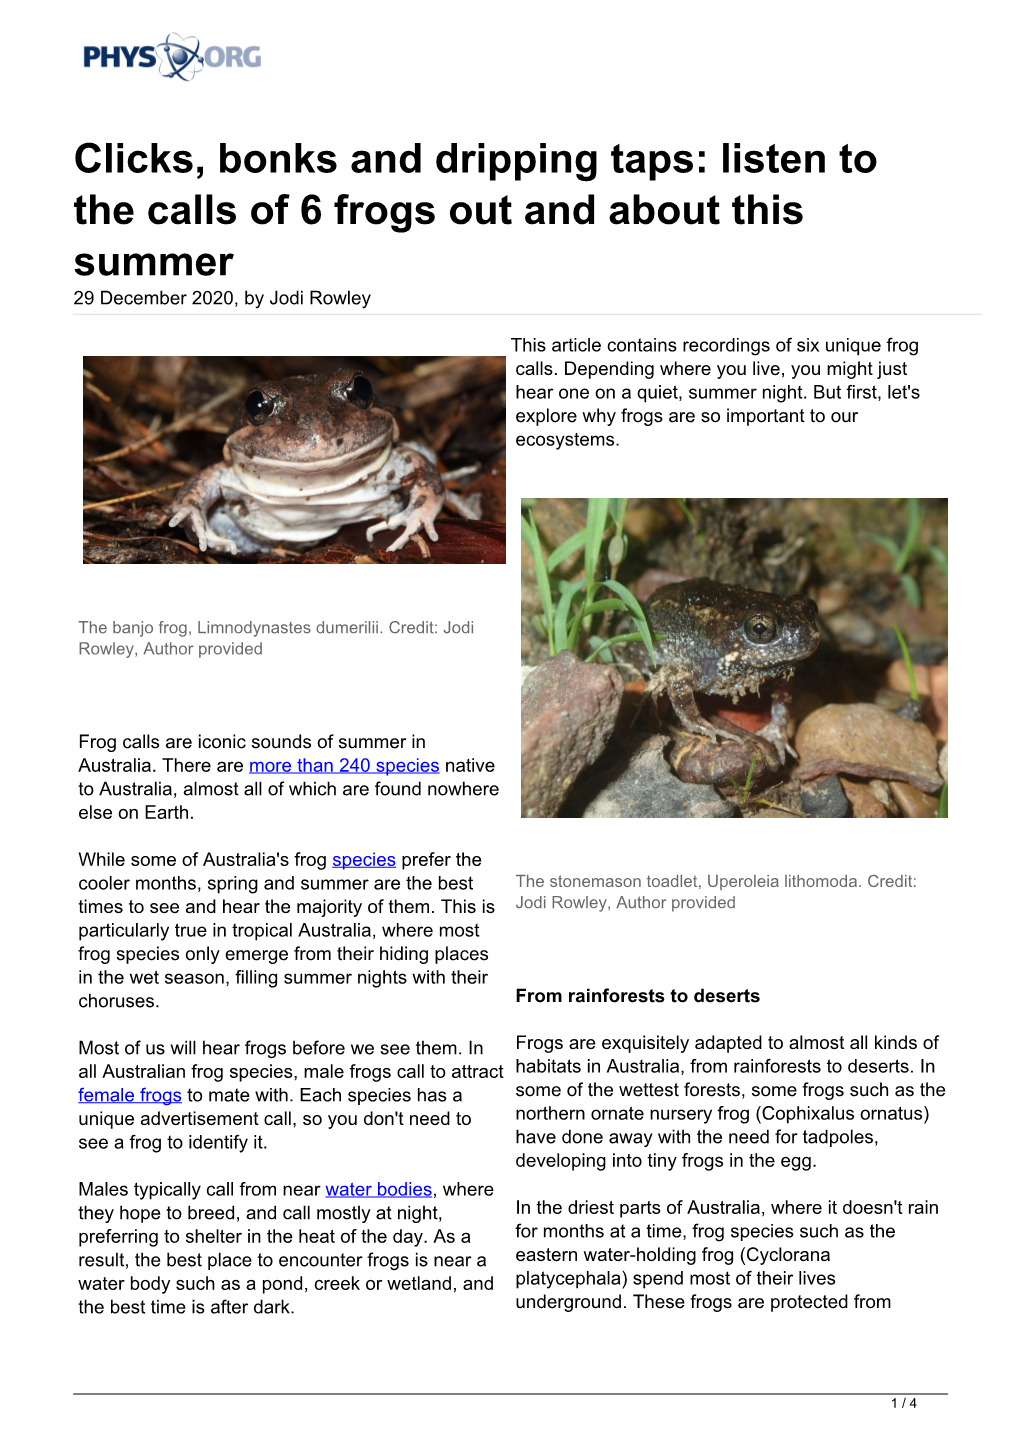 Clicks, Bonks and Dripping Taps: Listen to the Calls of 6 Frogs out and About This Summer 29 December 2020, by Jodi Rowley